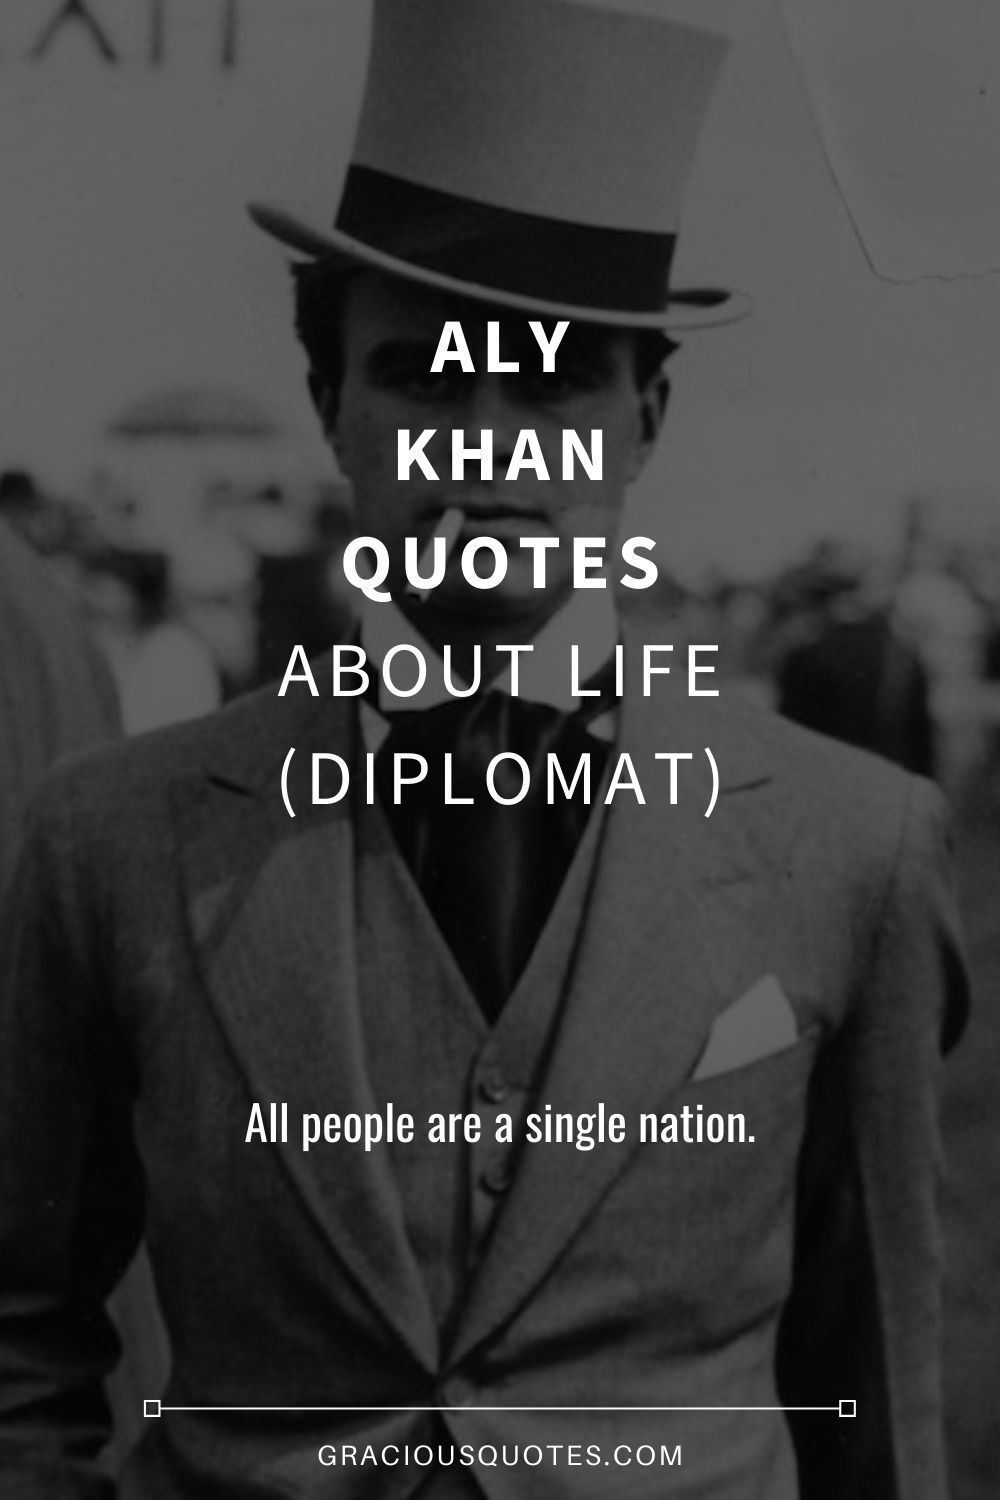 Aly Khan Quotes About Life (DIPLOMAT) - Gracious Quotes